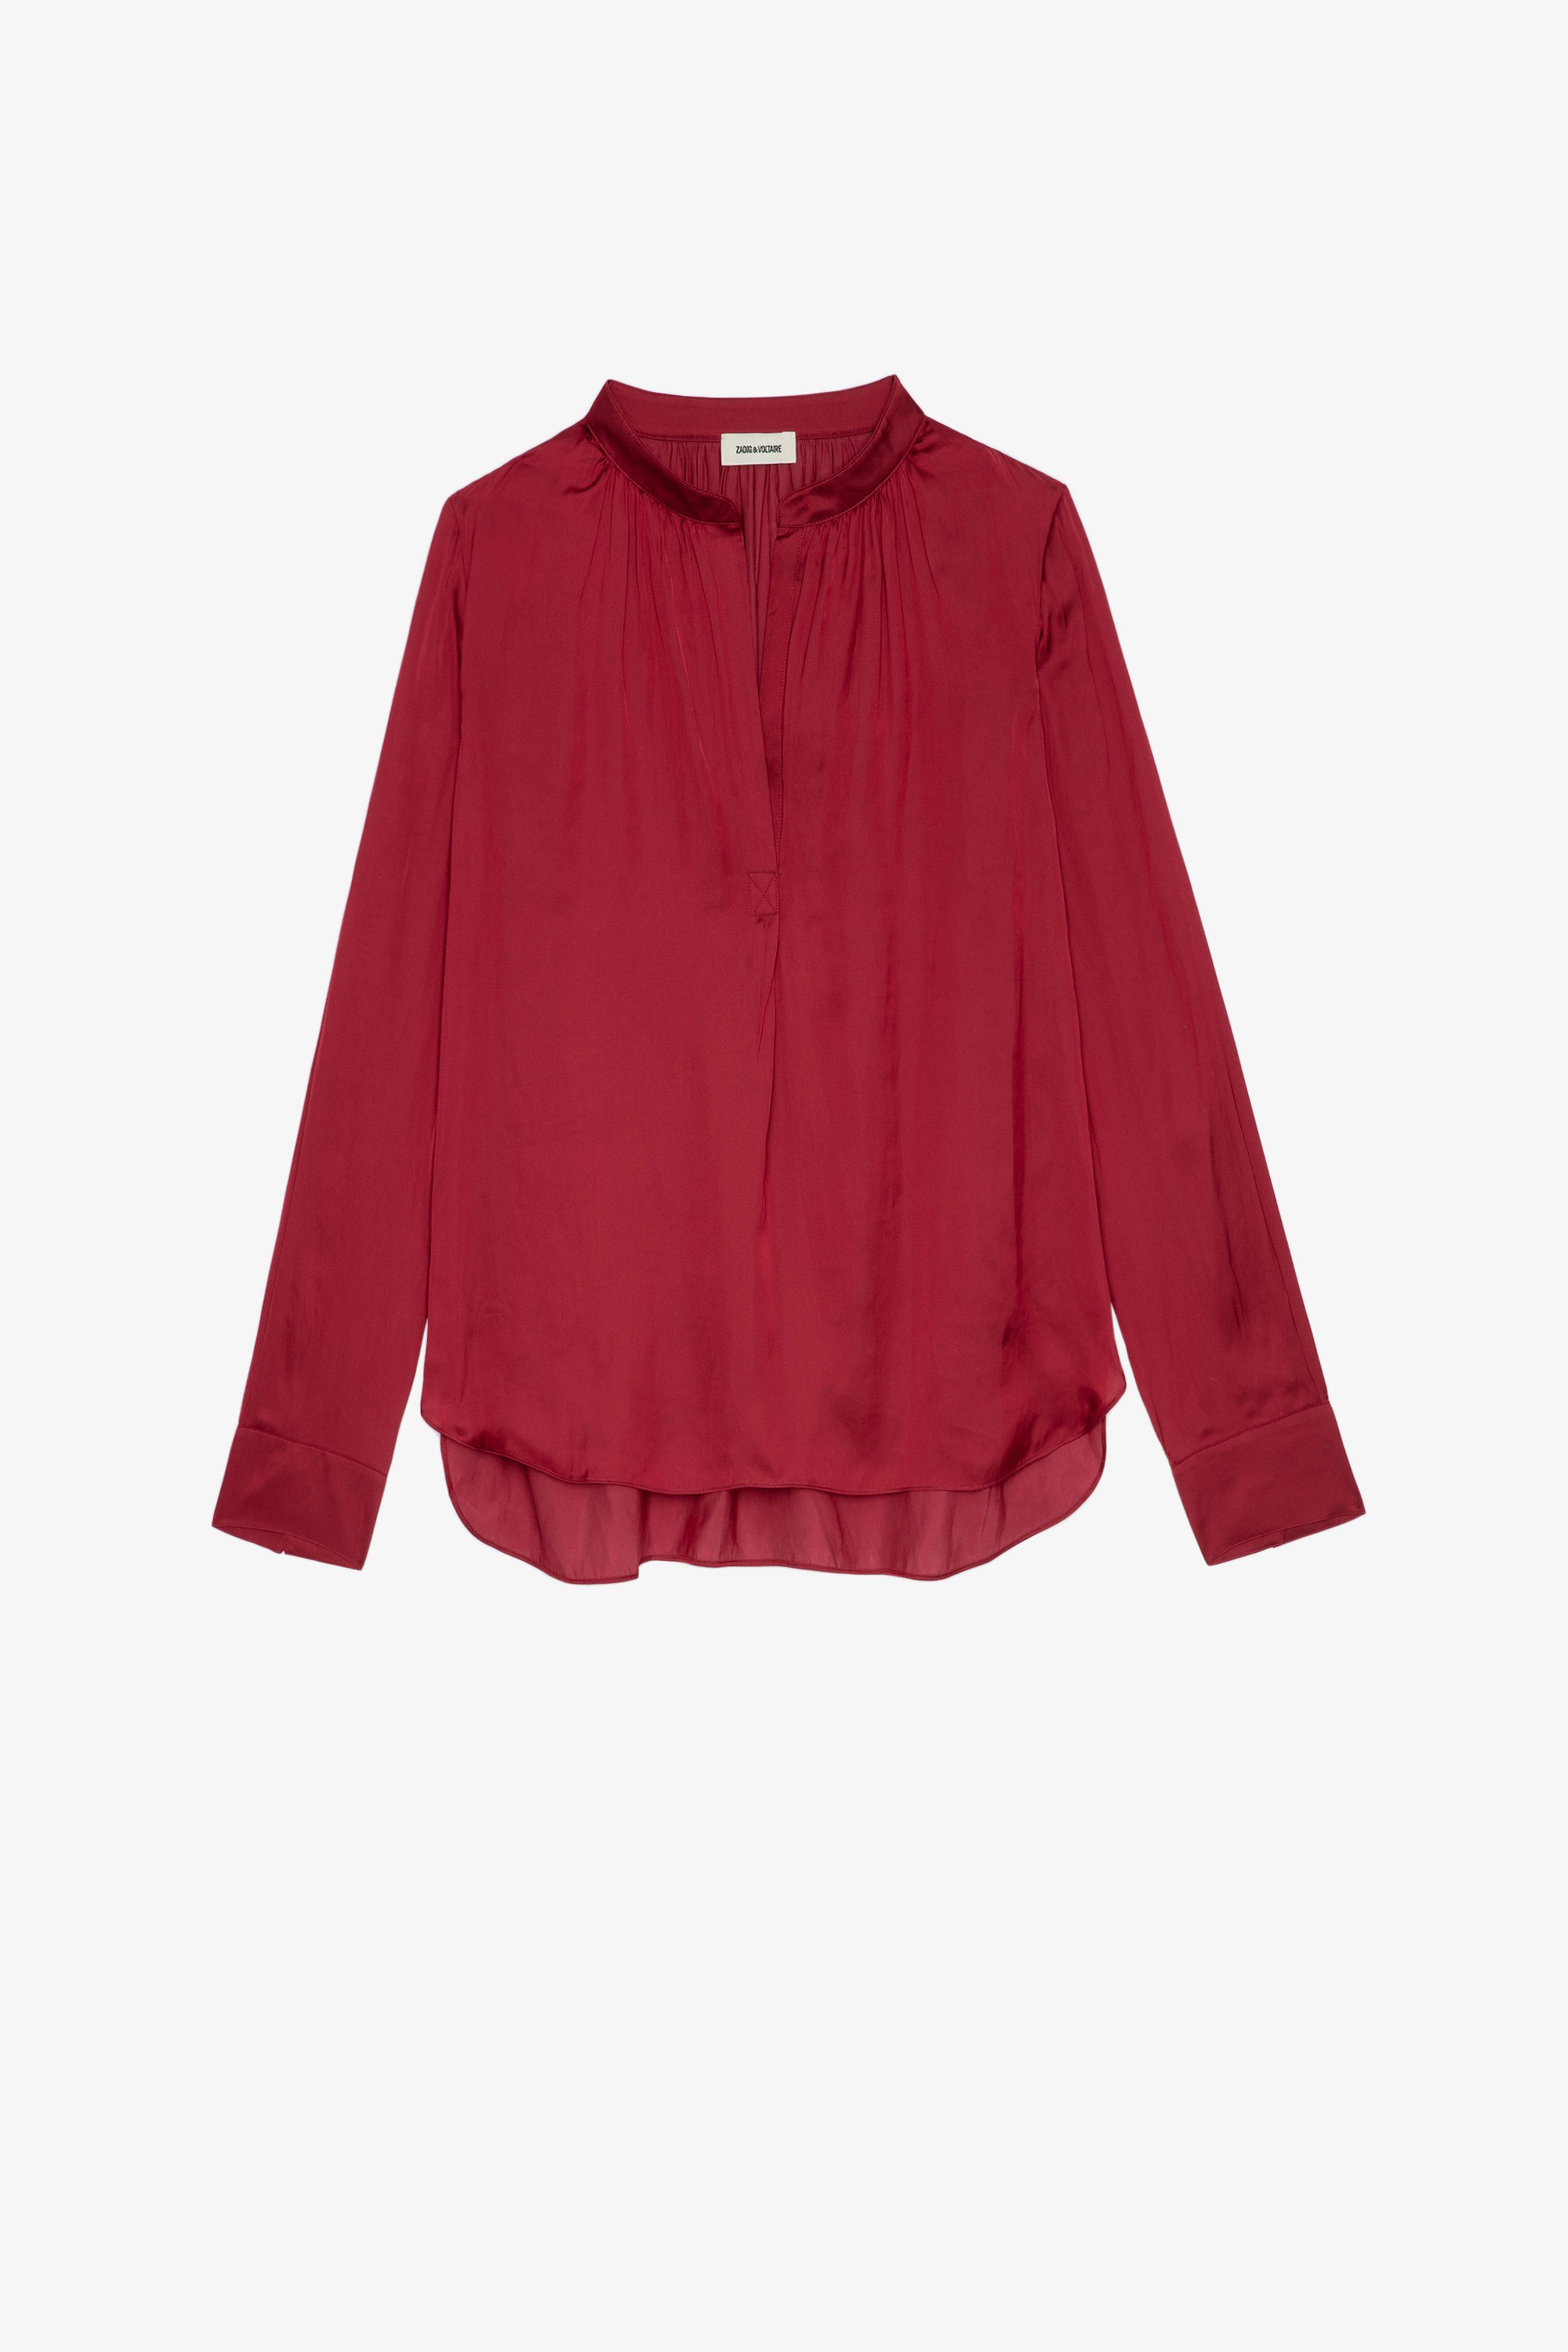 Tink Satin トップス Women’s red satiny blouse with open collar